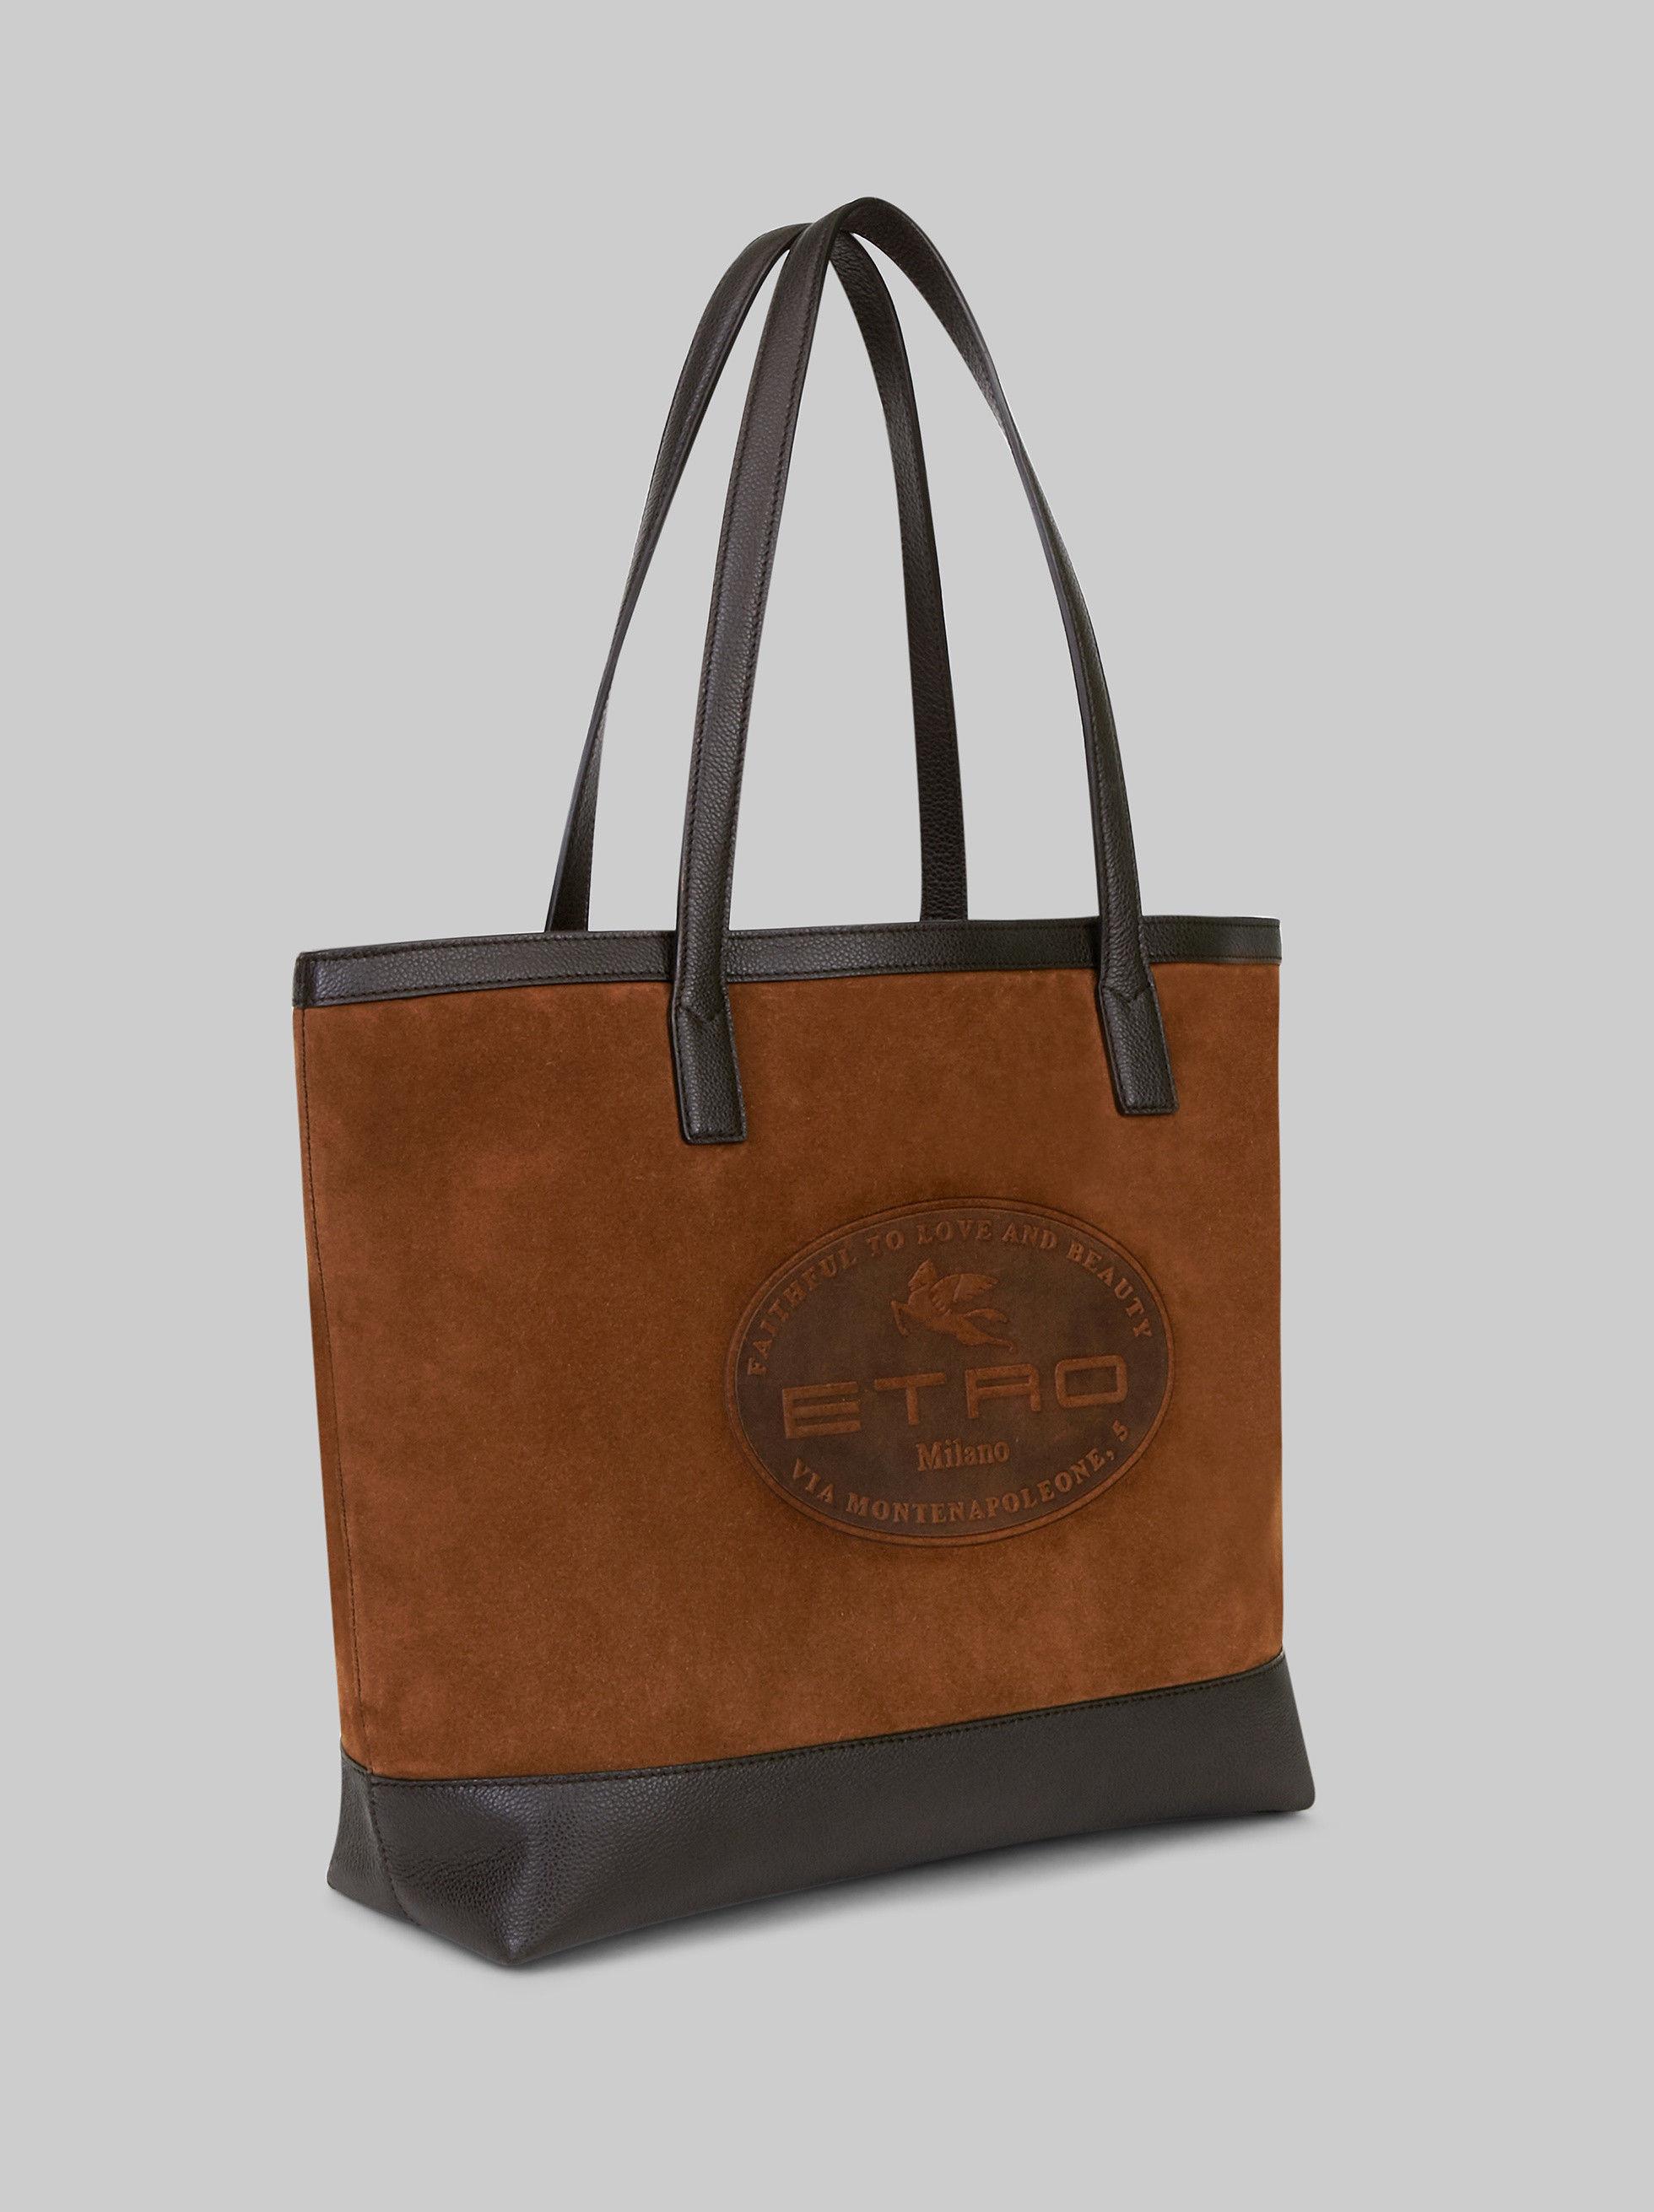 Etro Split Leather Bag With Embossed Logo in Brown for Men - Lyst